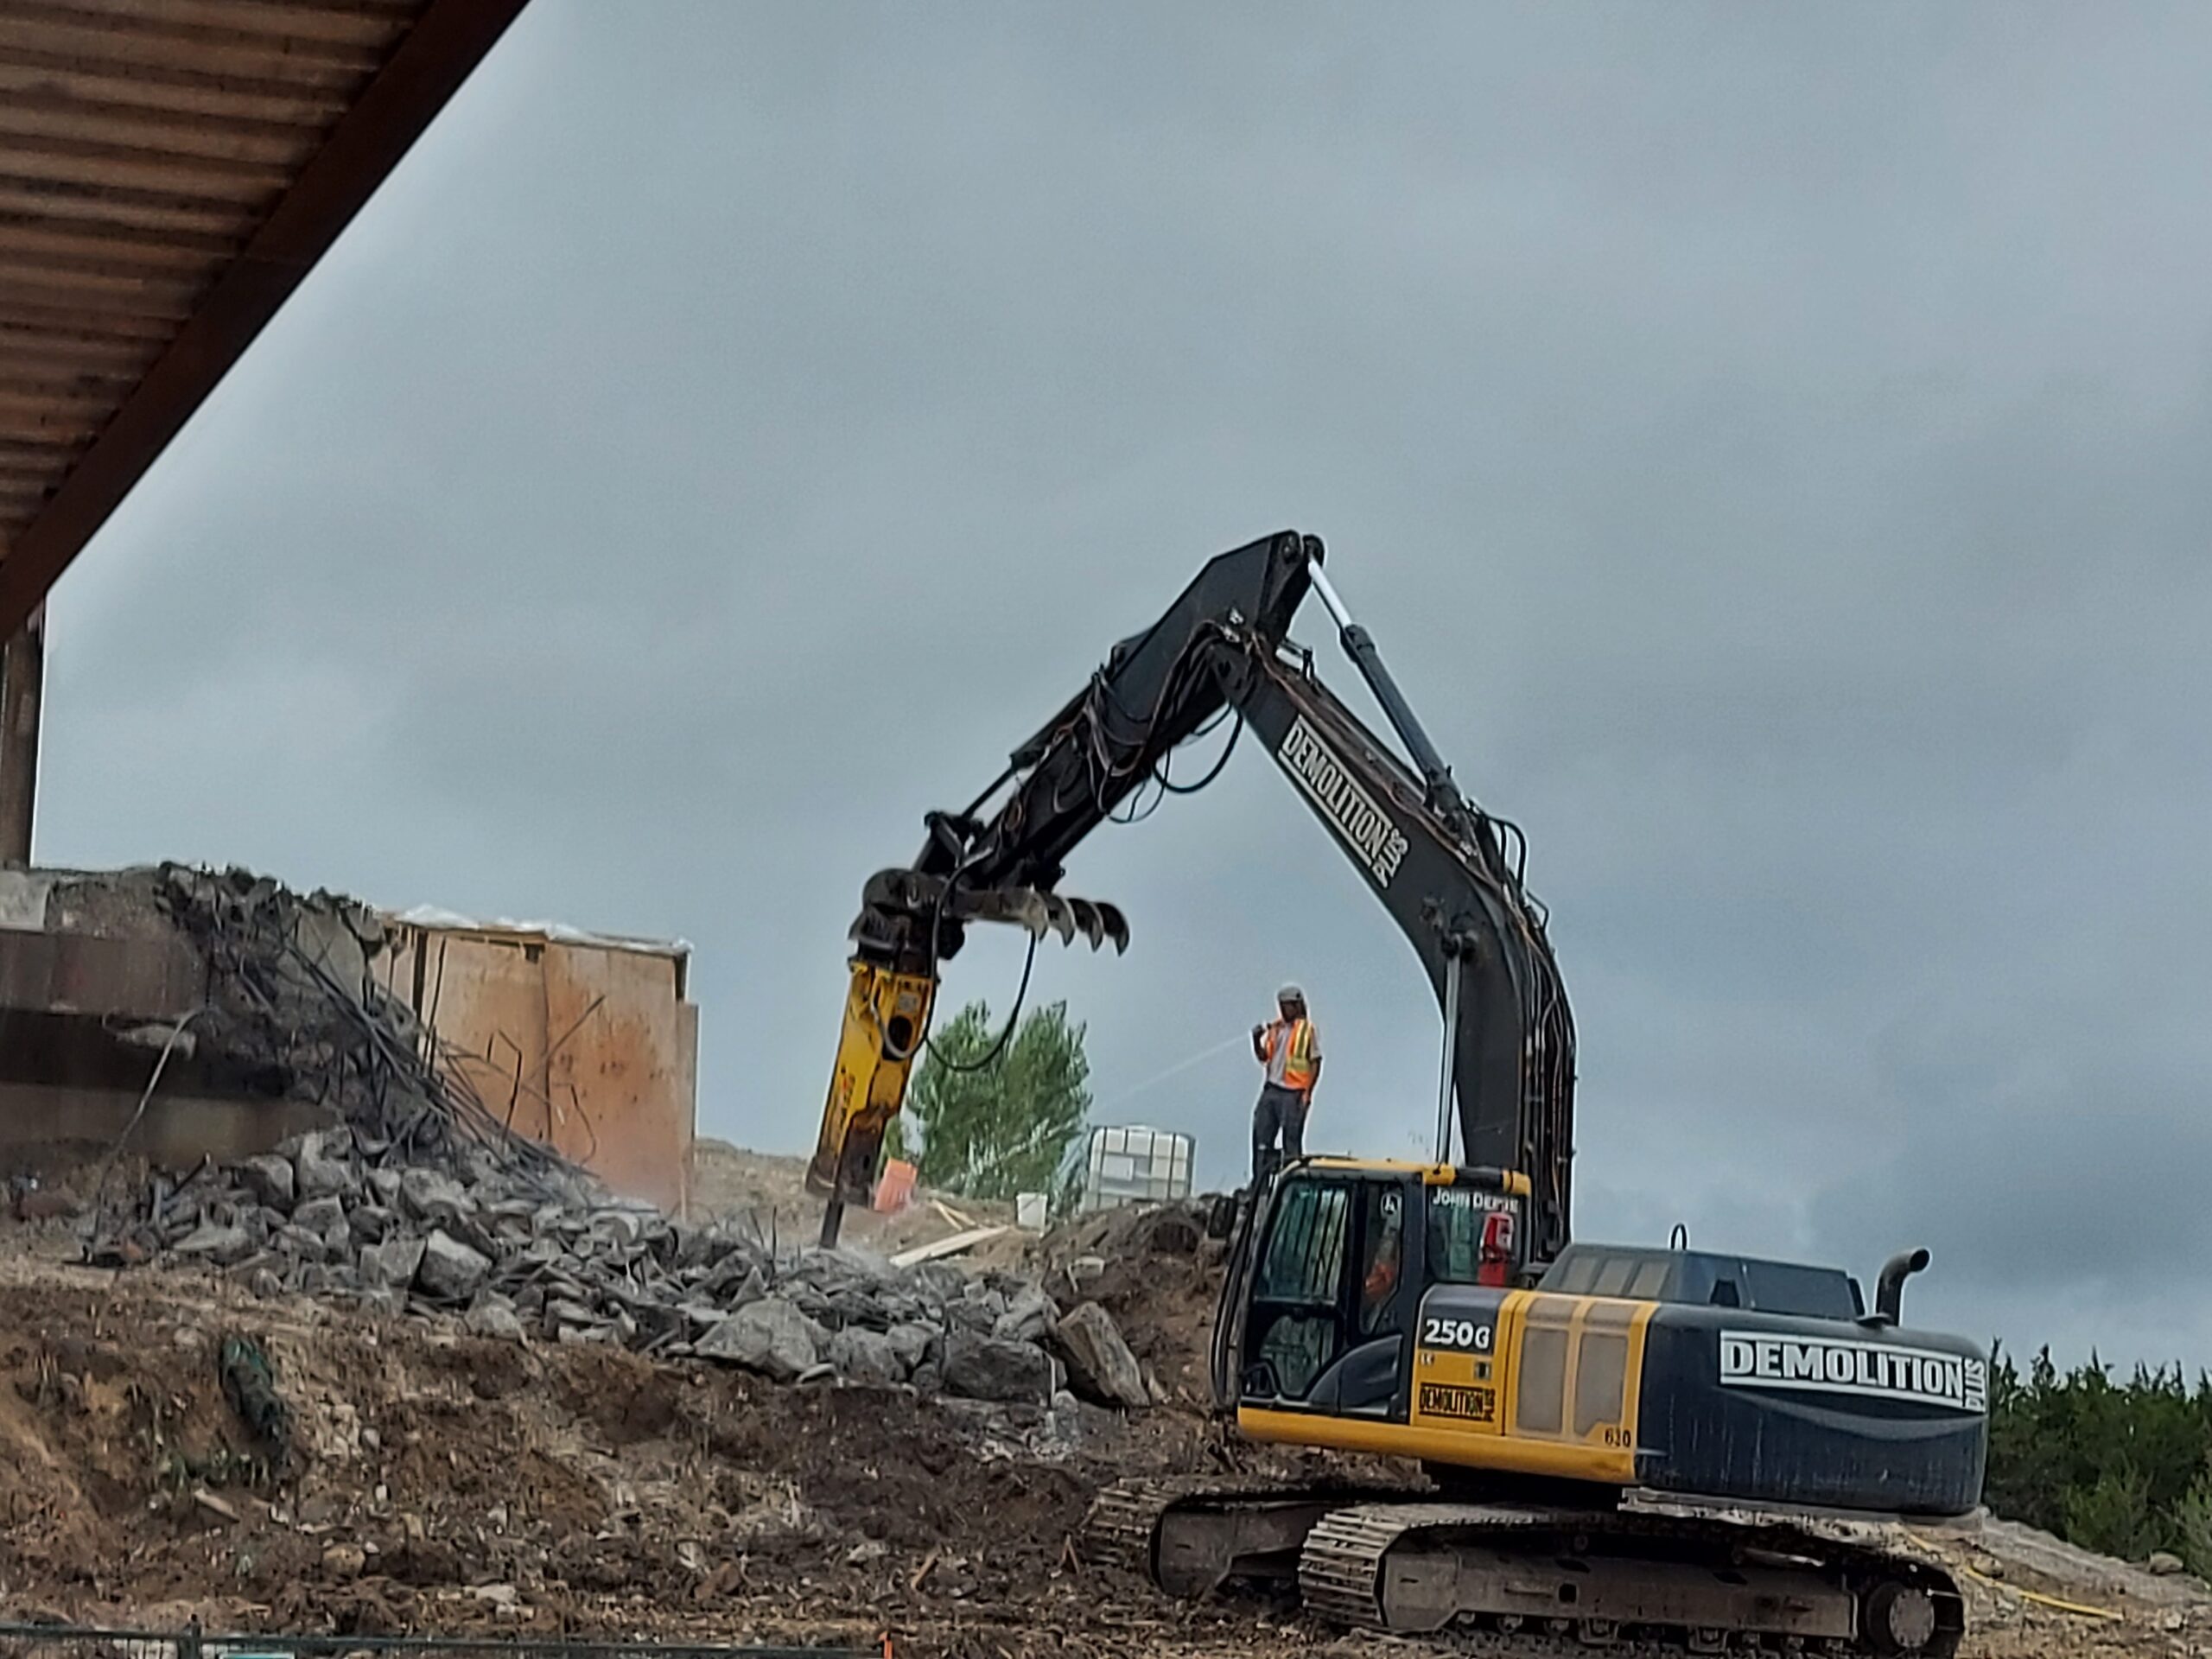 South abutment demolition, hoe-ramming